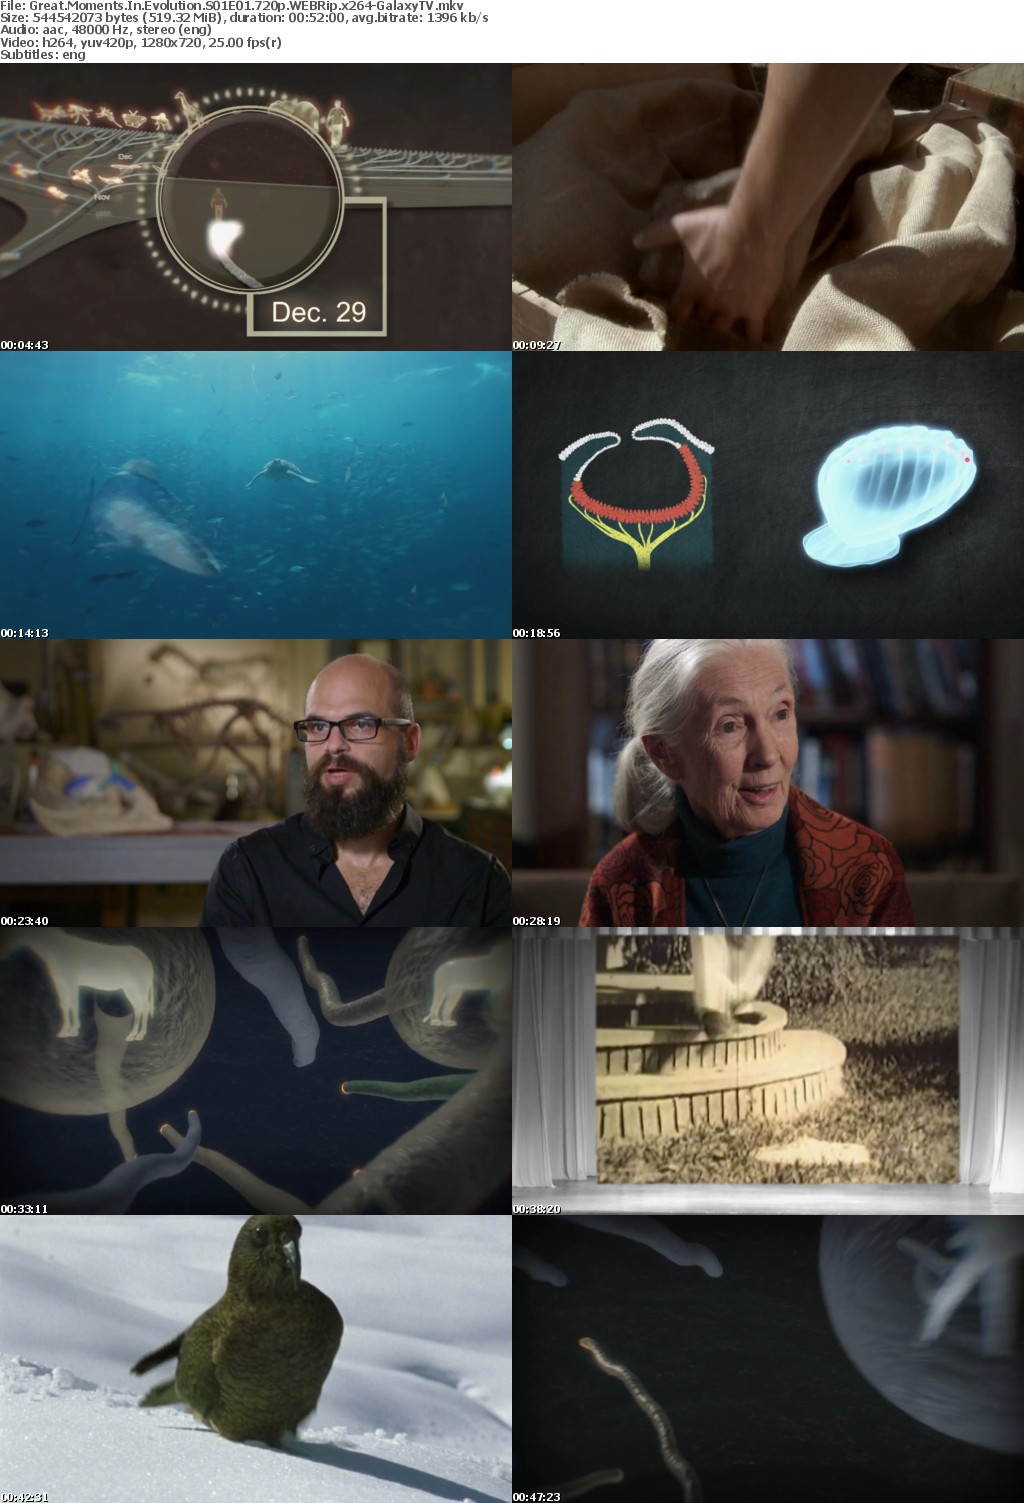 Great Moments In Evolution S01 COMPLETE 720p WEBRip x264-GalaxyTV